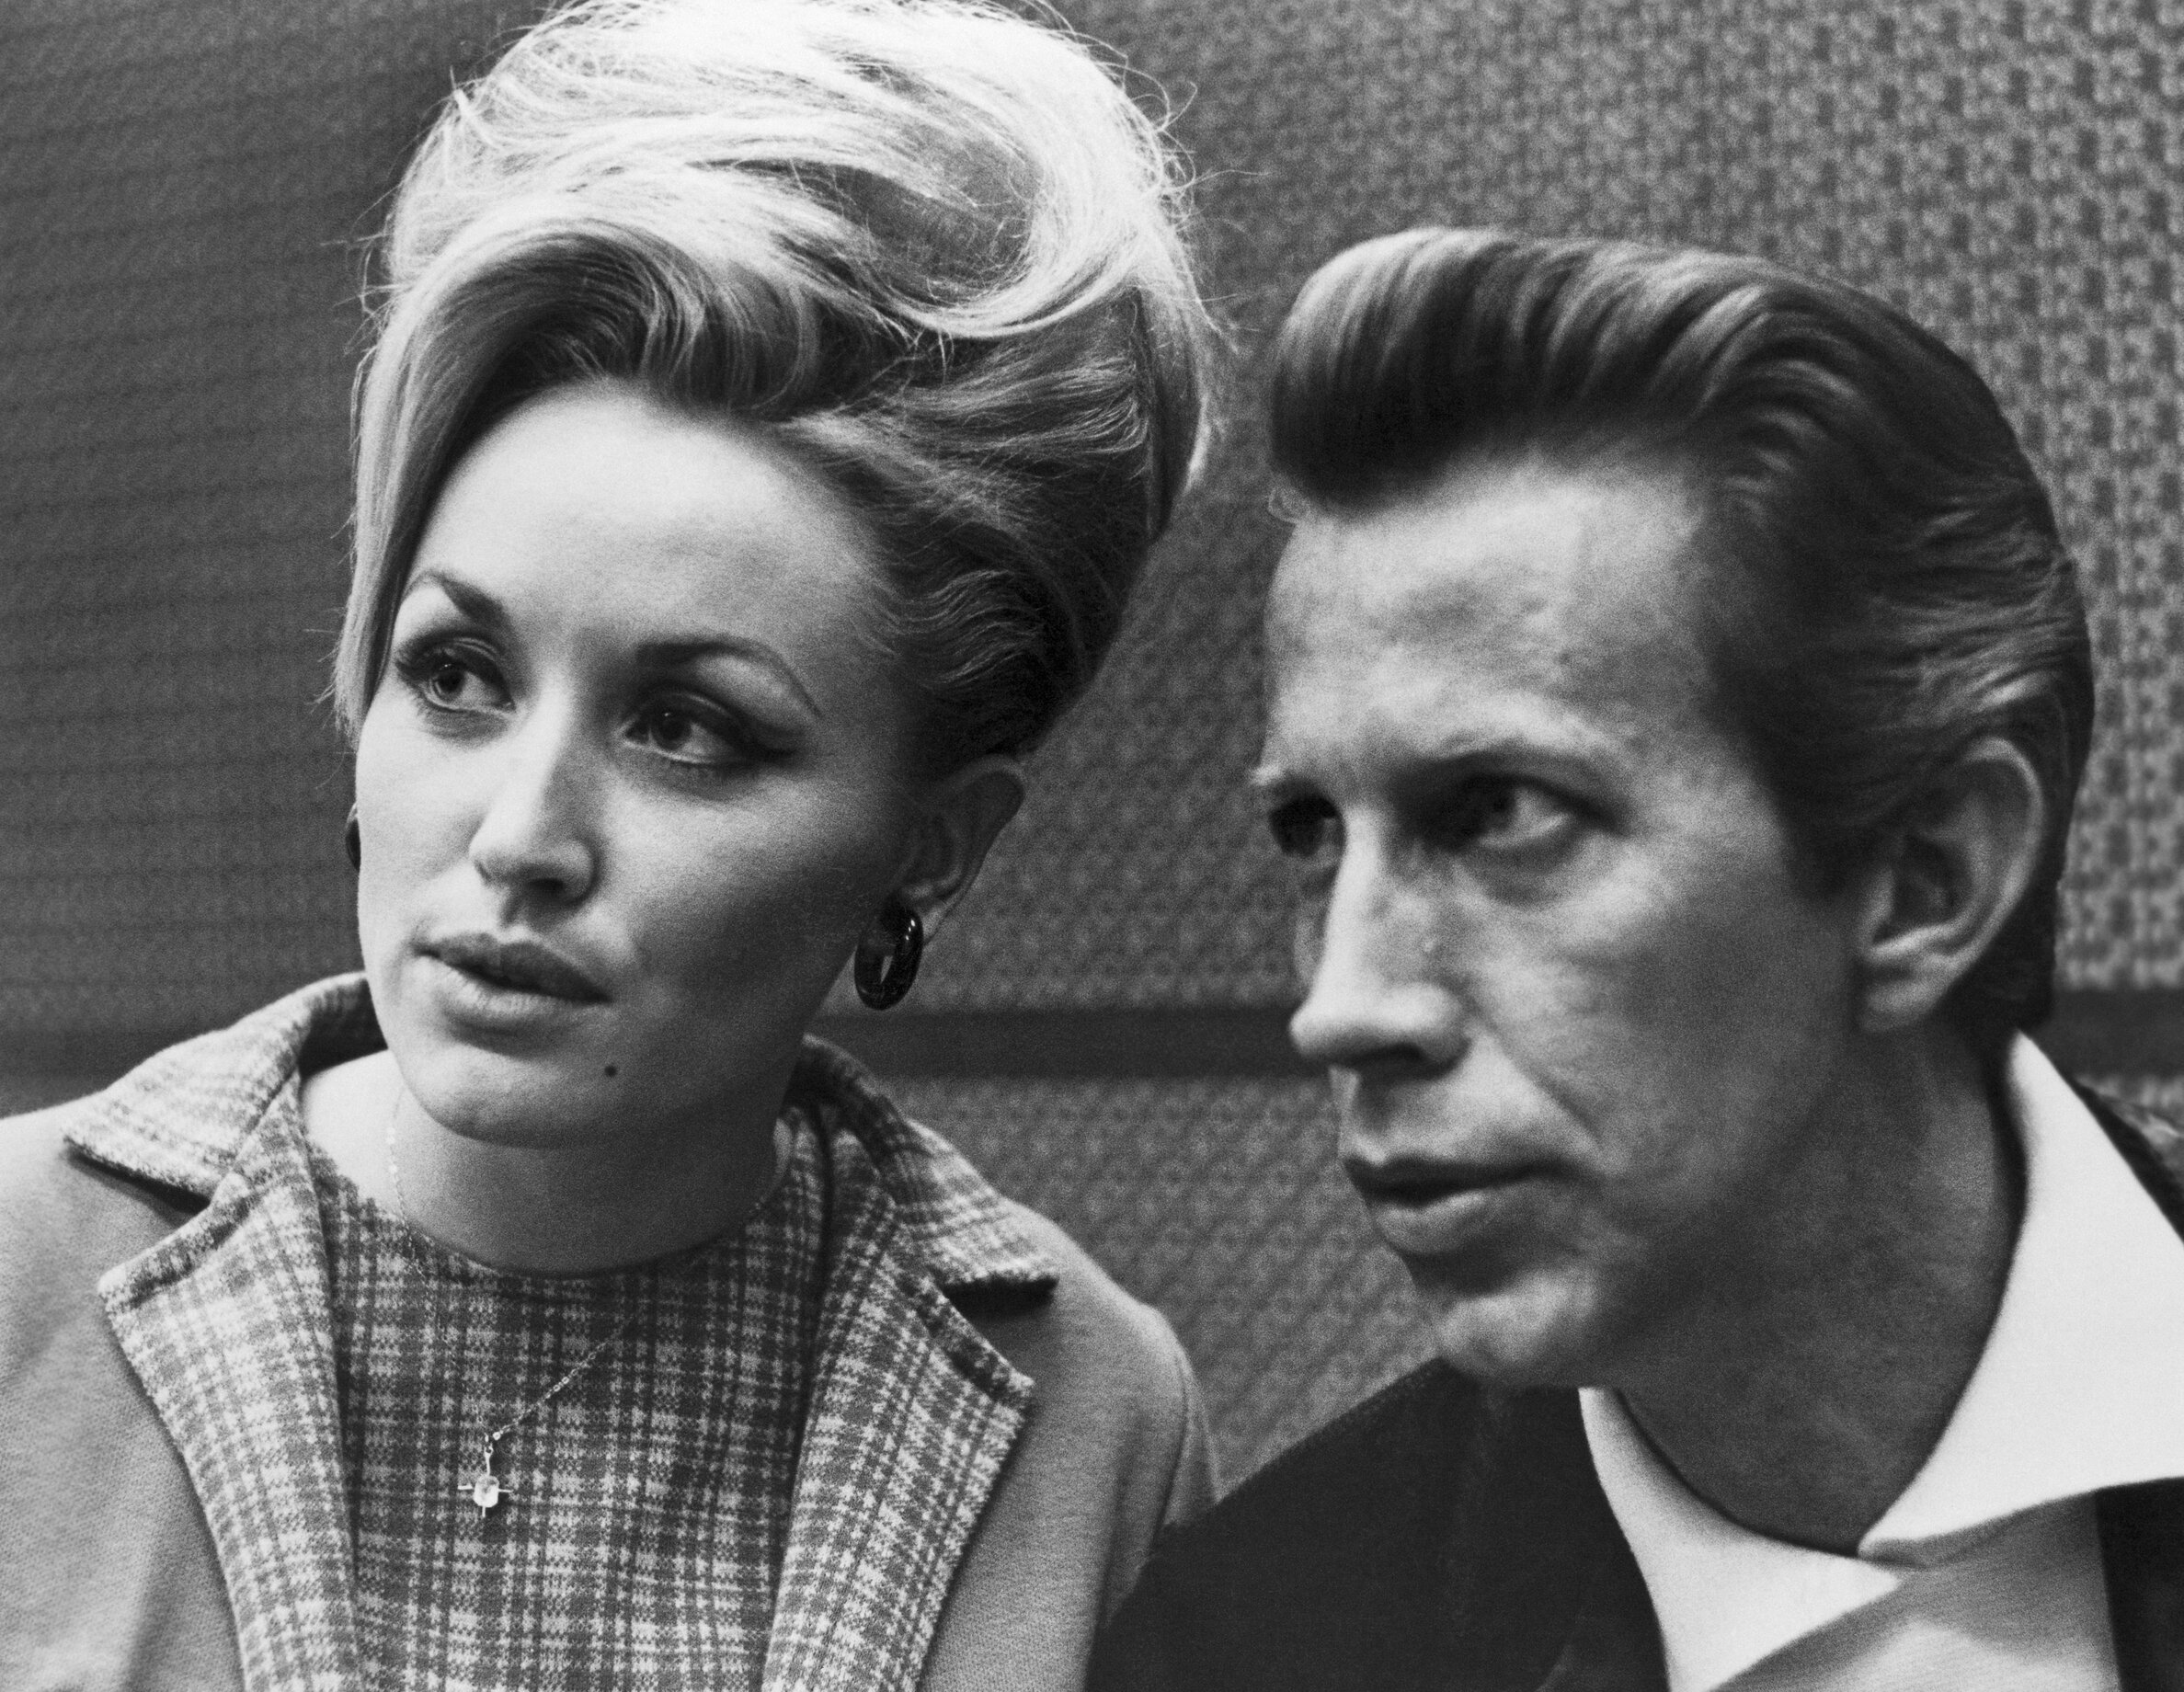 A close-up, candid photo of Dolly Parton and Porter Wagoner in 1968.